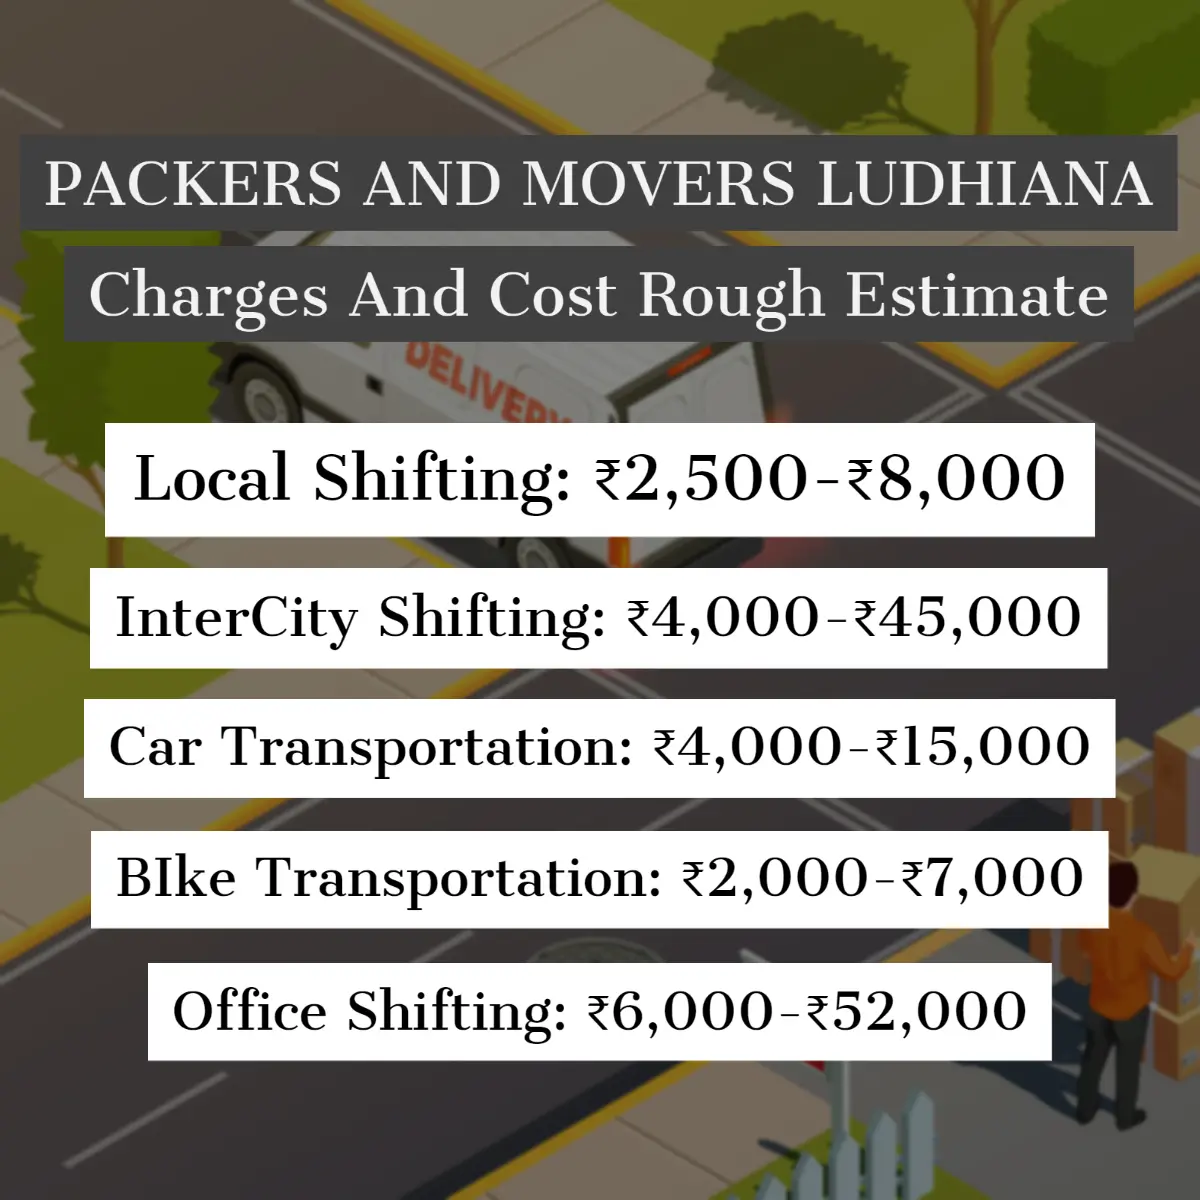 Packers and Movers Ludhiana Charges